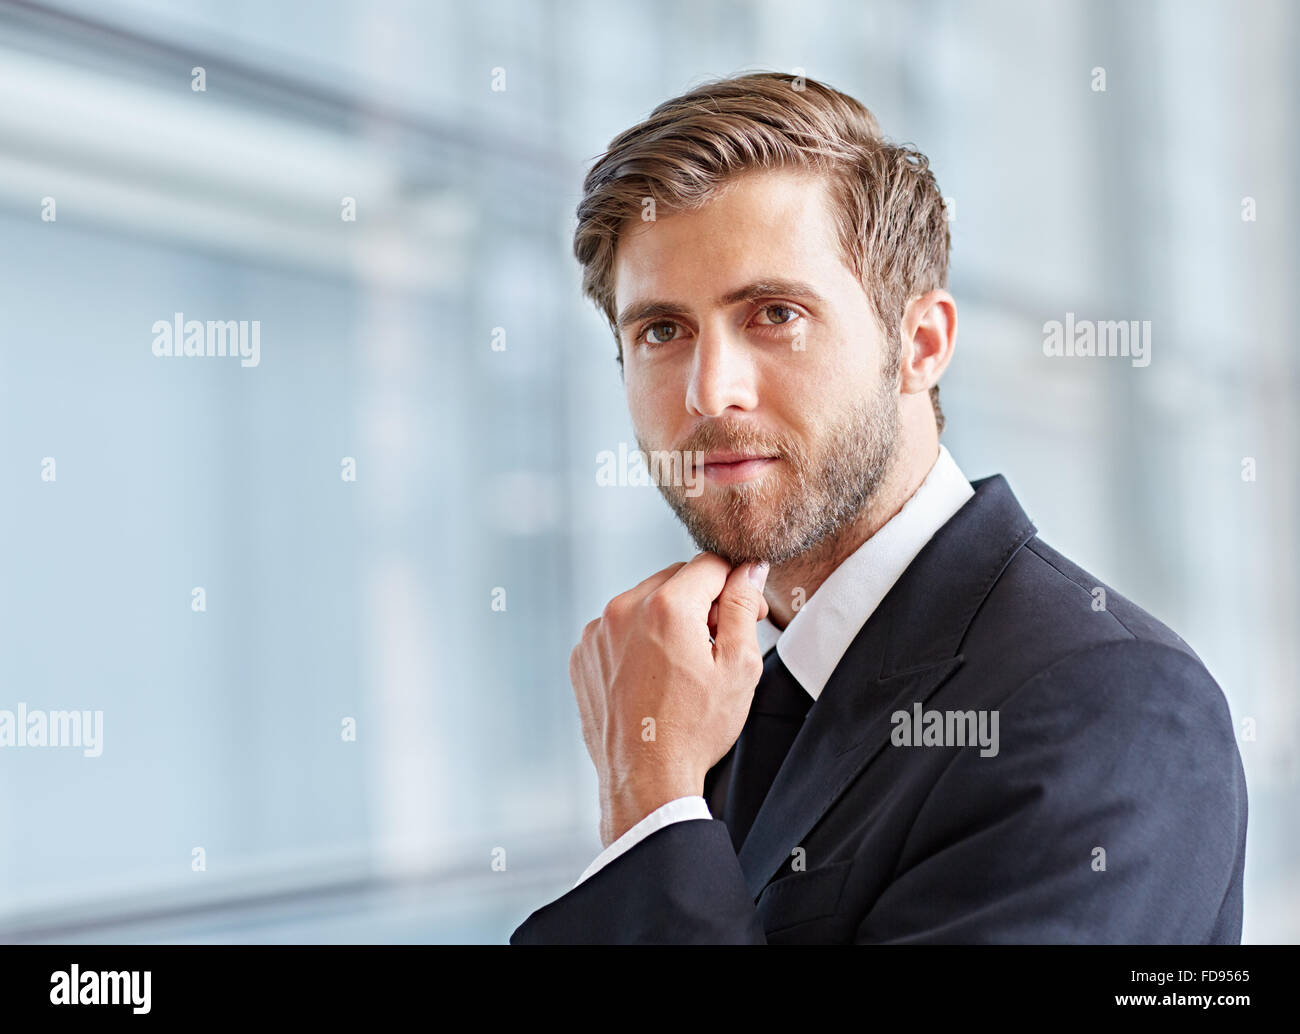 Considered approach to modern business Stock Photo